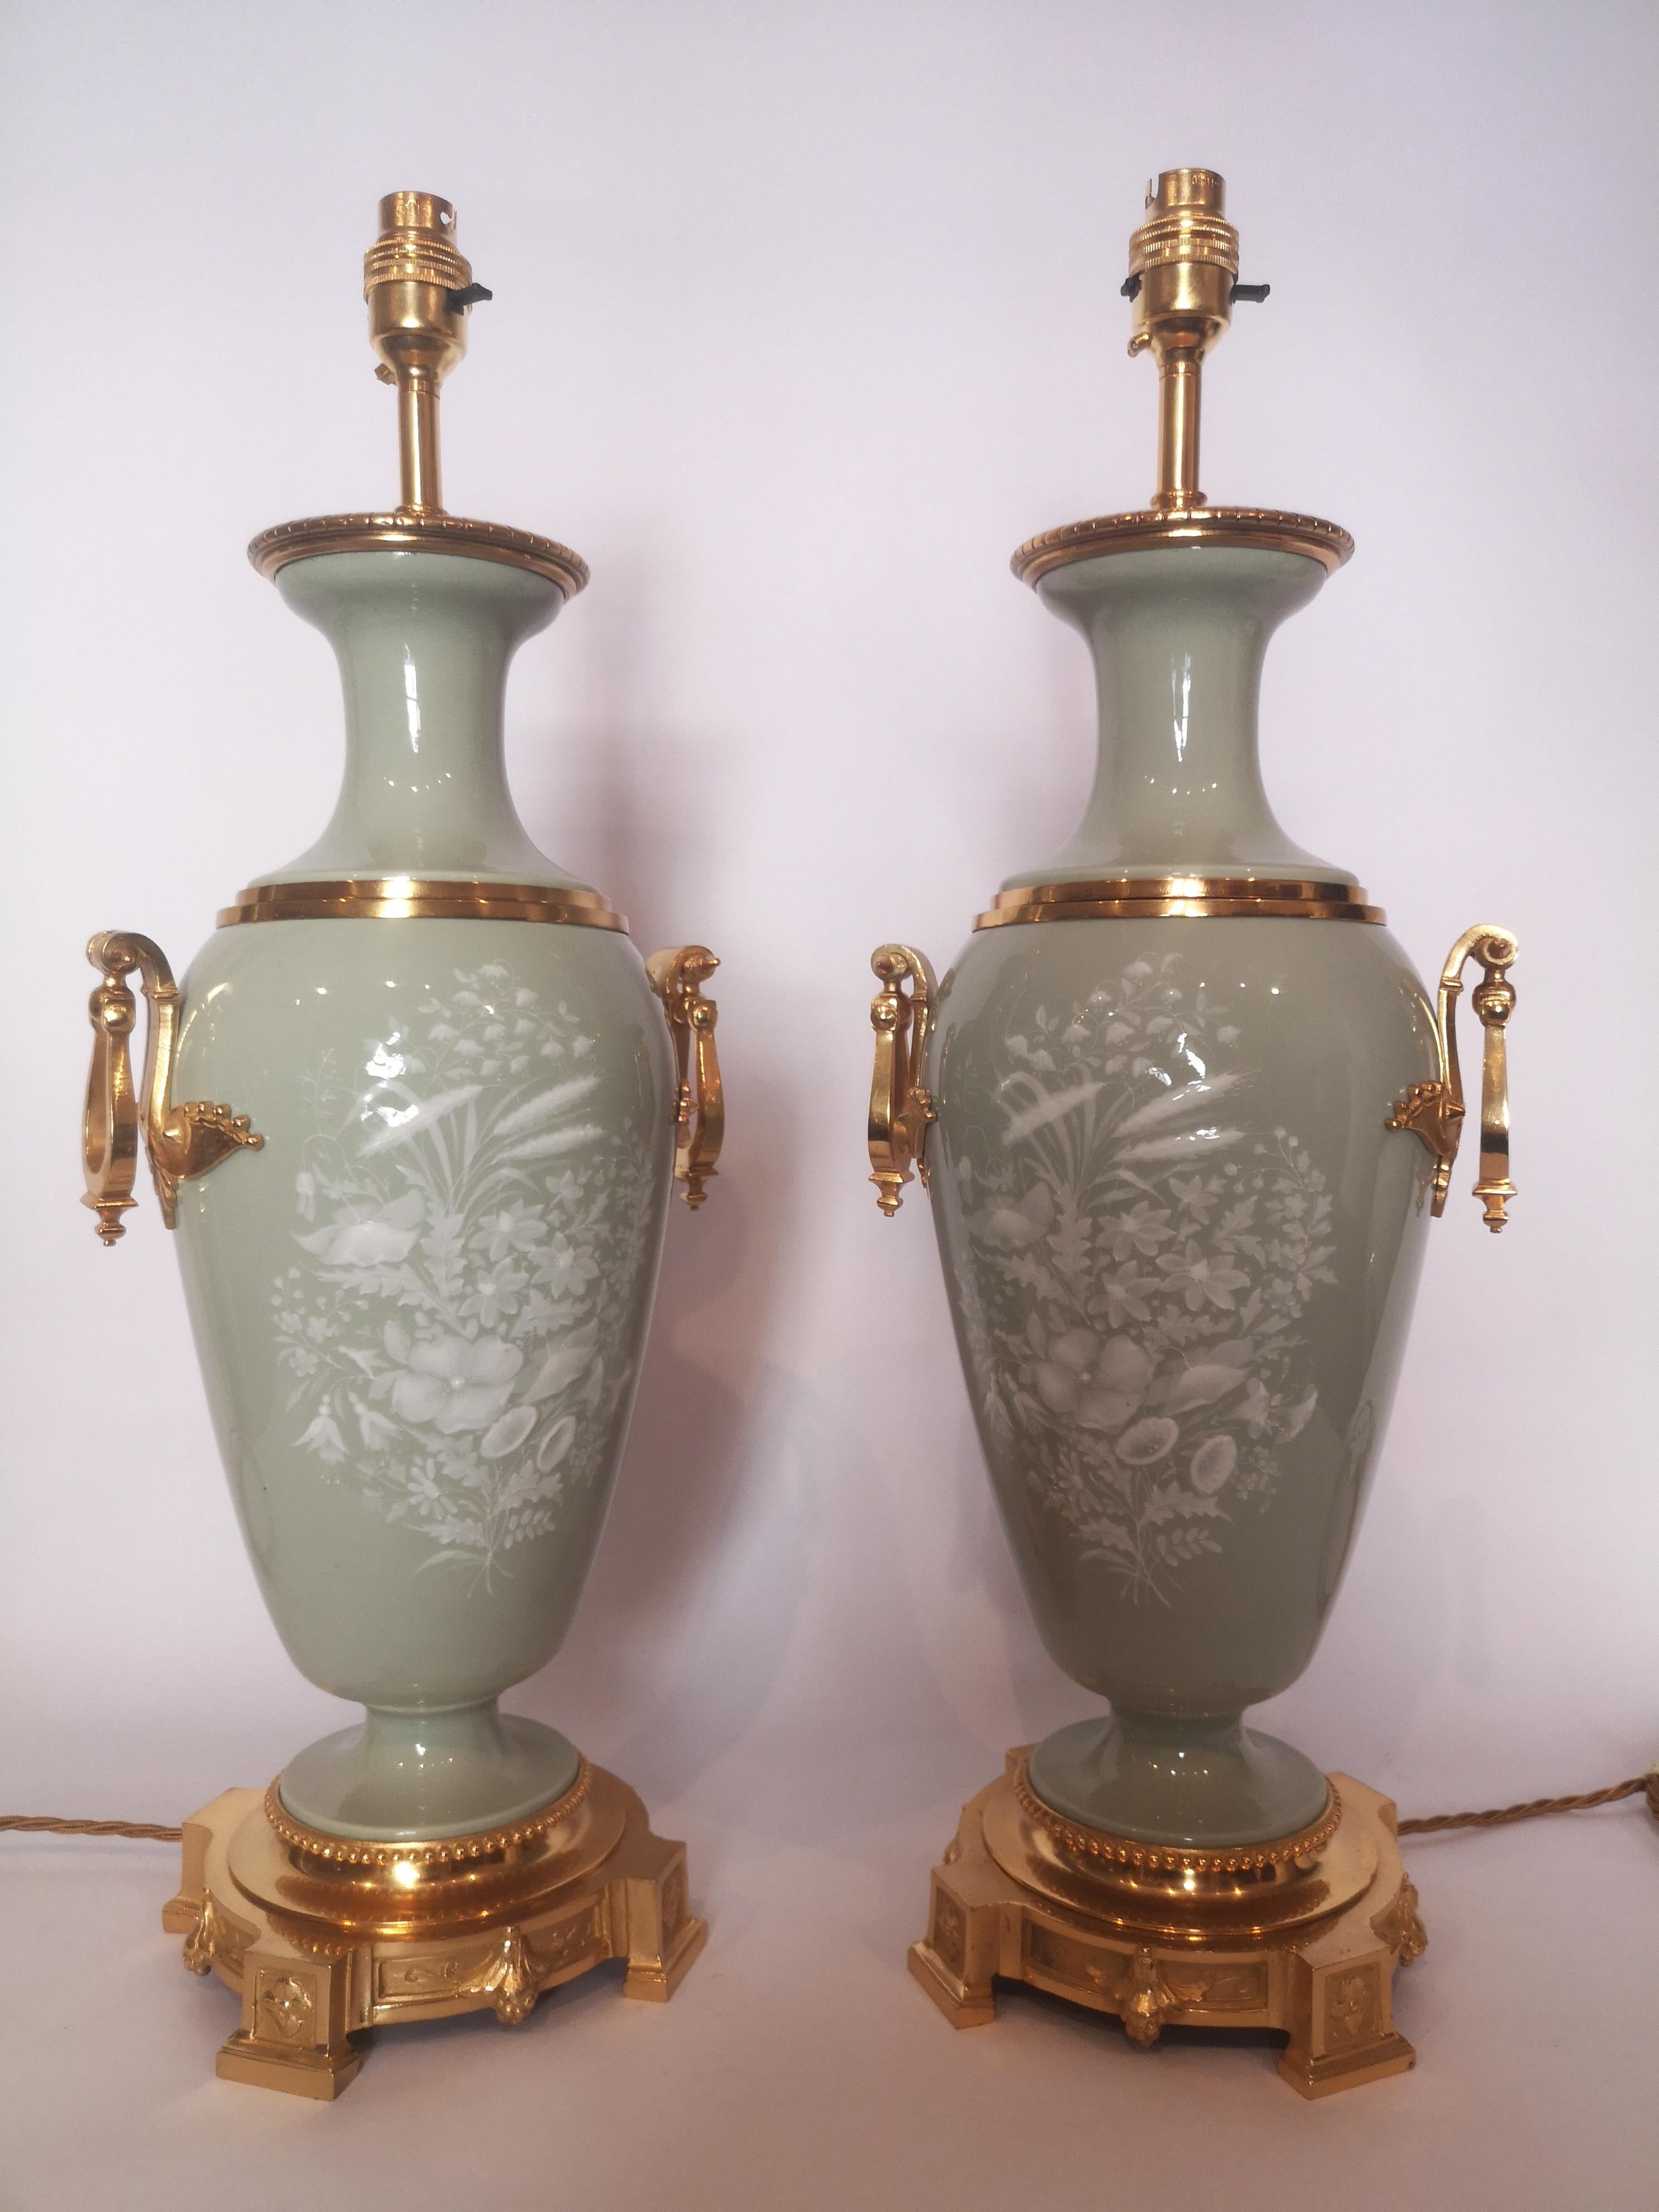 Pair of late 19th century French Pate Sur Pate celadon porcelain lamps, with raised white floral decoration.
Originally oil lamps, now converted for electricity.
French, circa 1870.